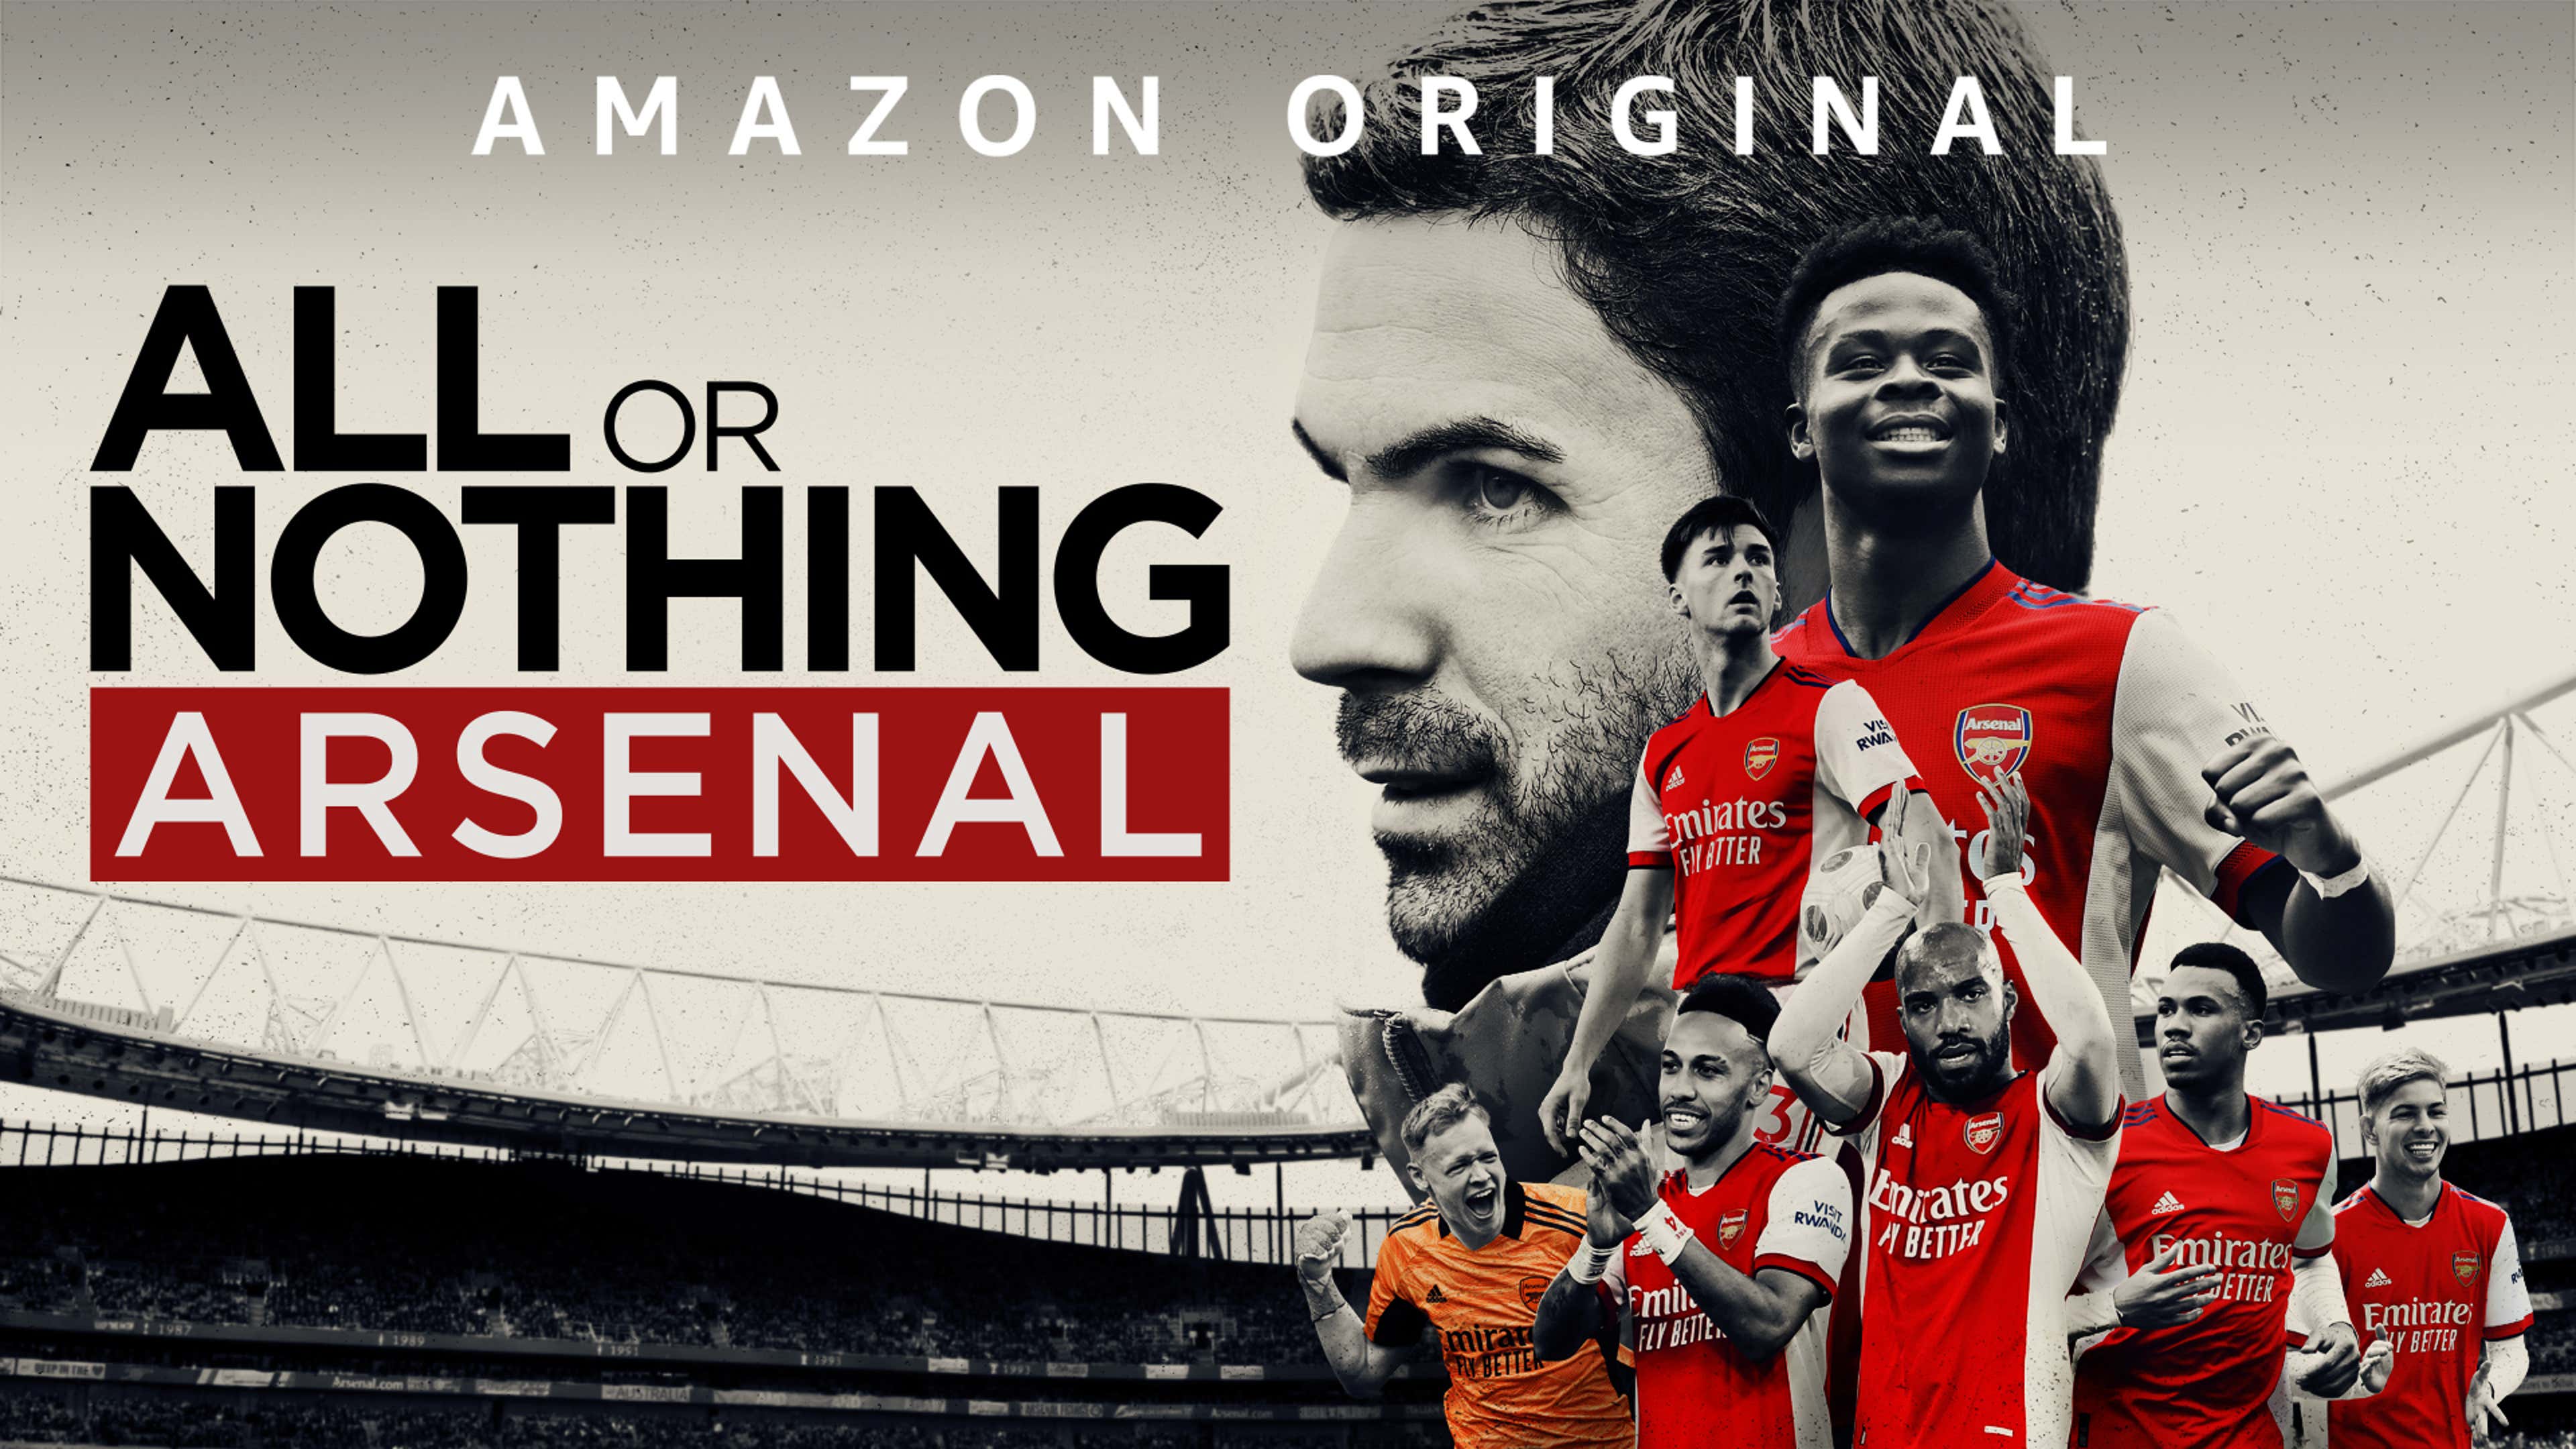 All or Nothing Arsenal 